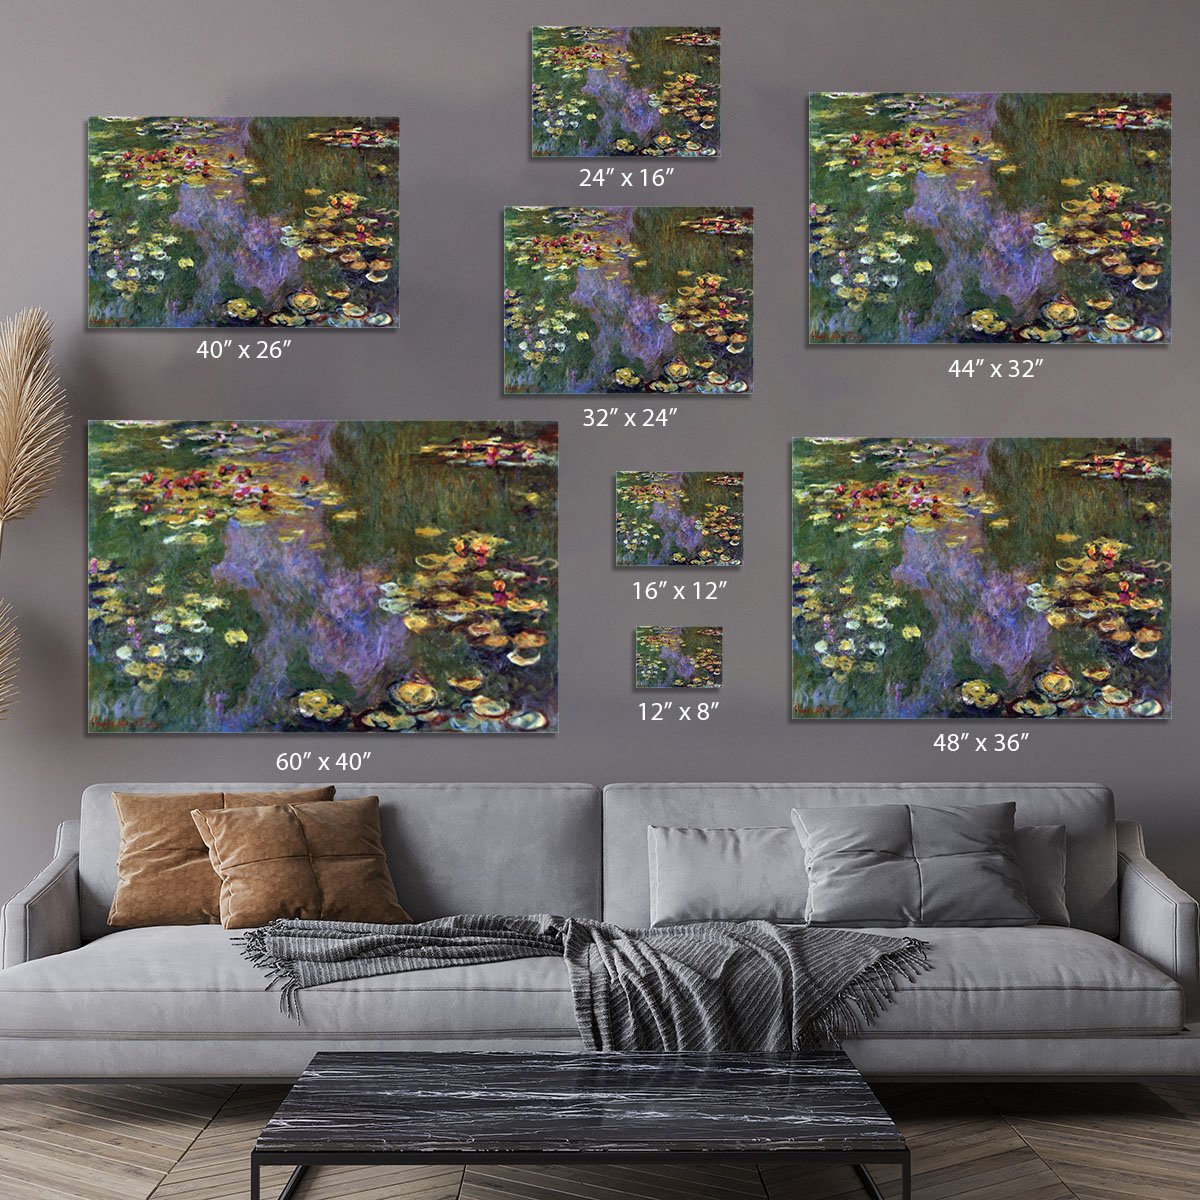 Water Lily Pond Giverny by Monet Canvas Print or Poster